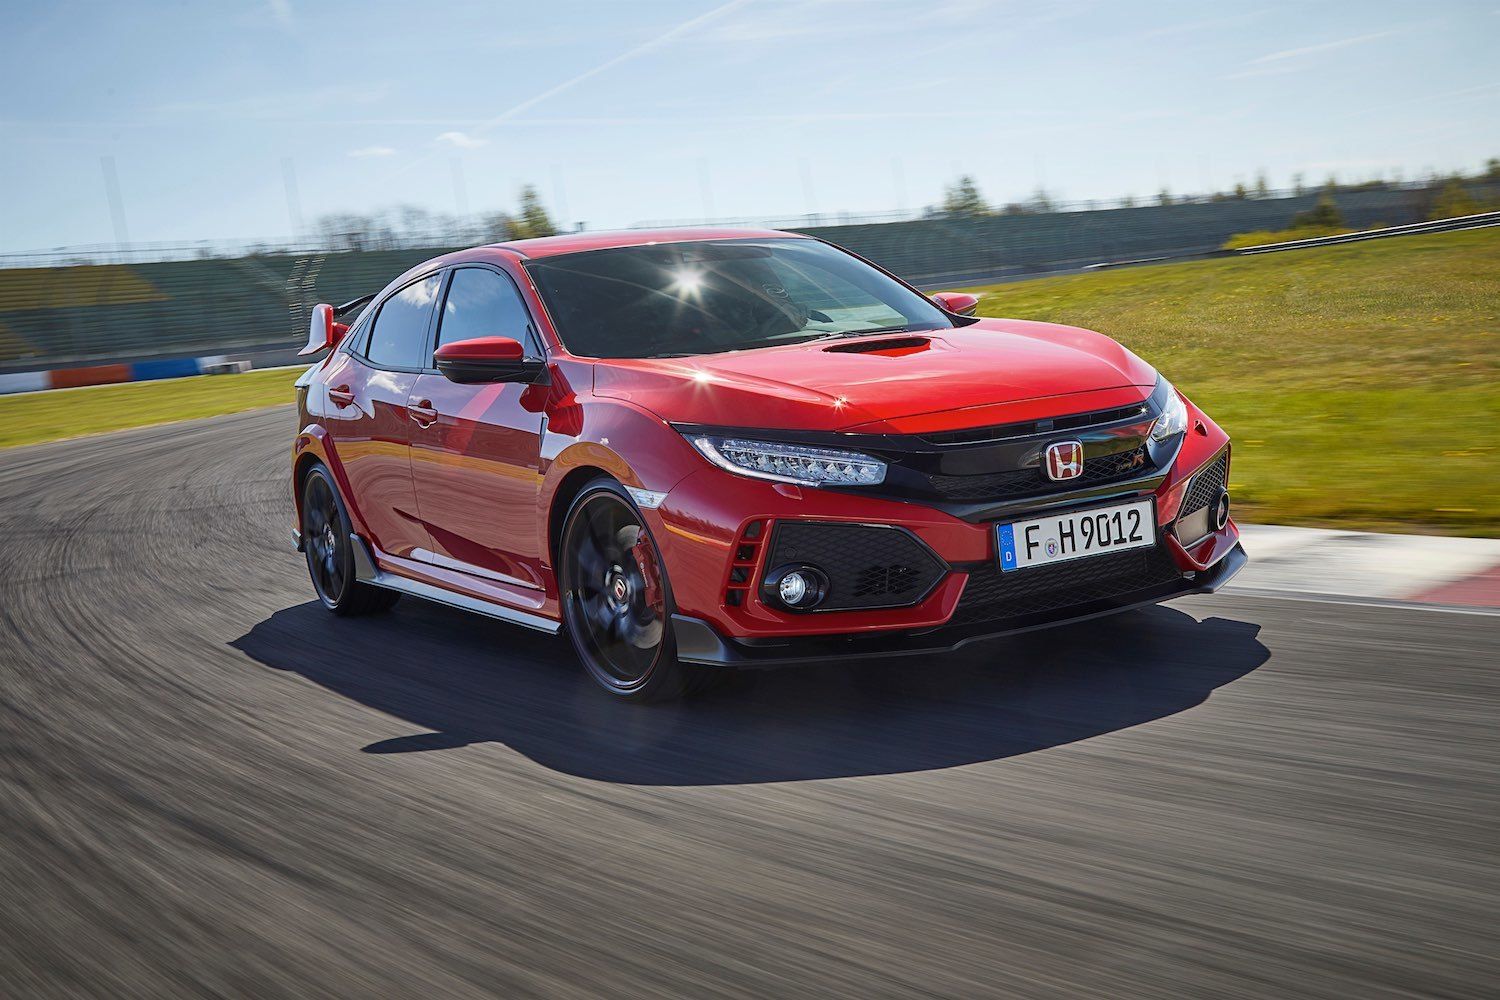 Tim Barnes-Clay reviews the 2018 Honda Civic Type R at the first drives 4